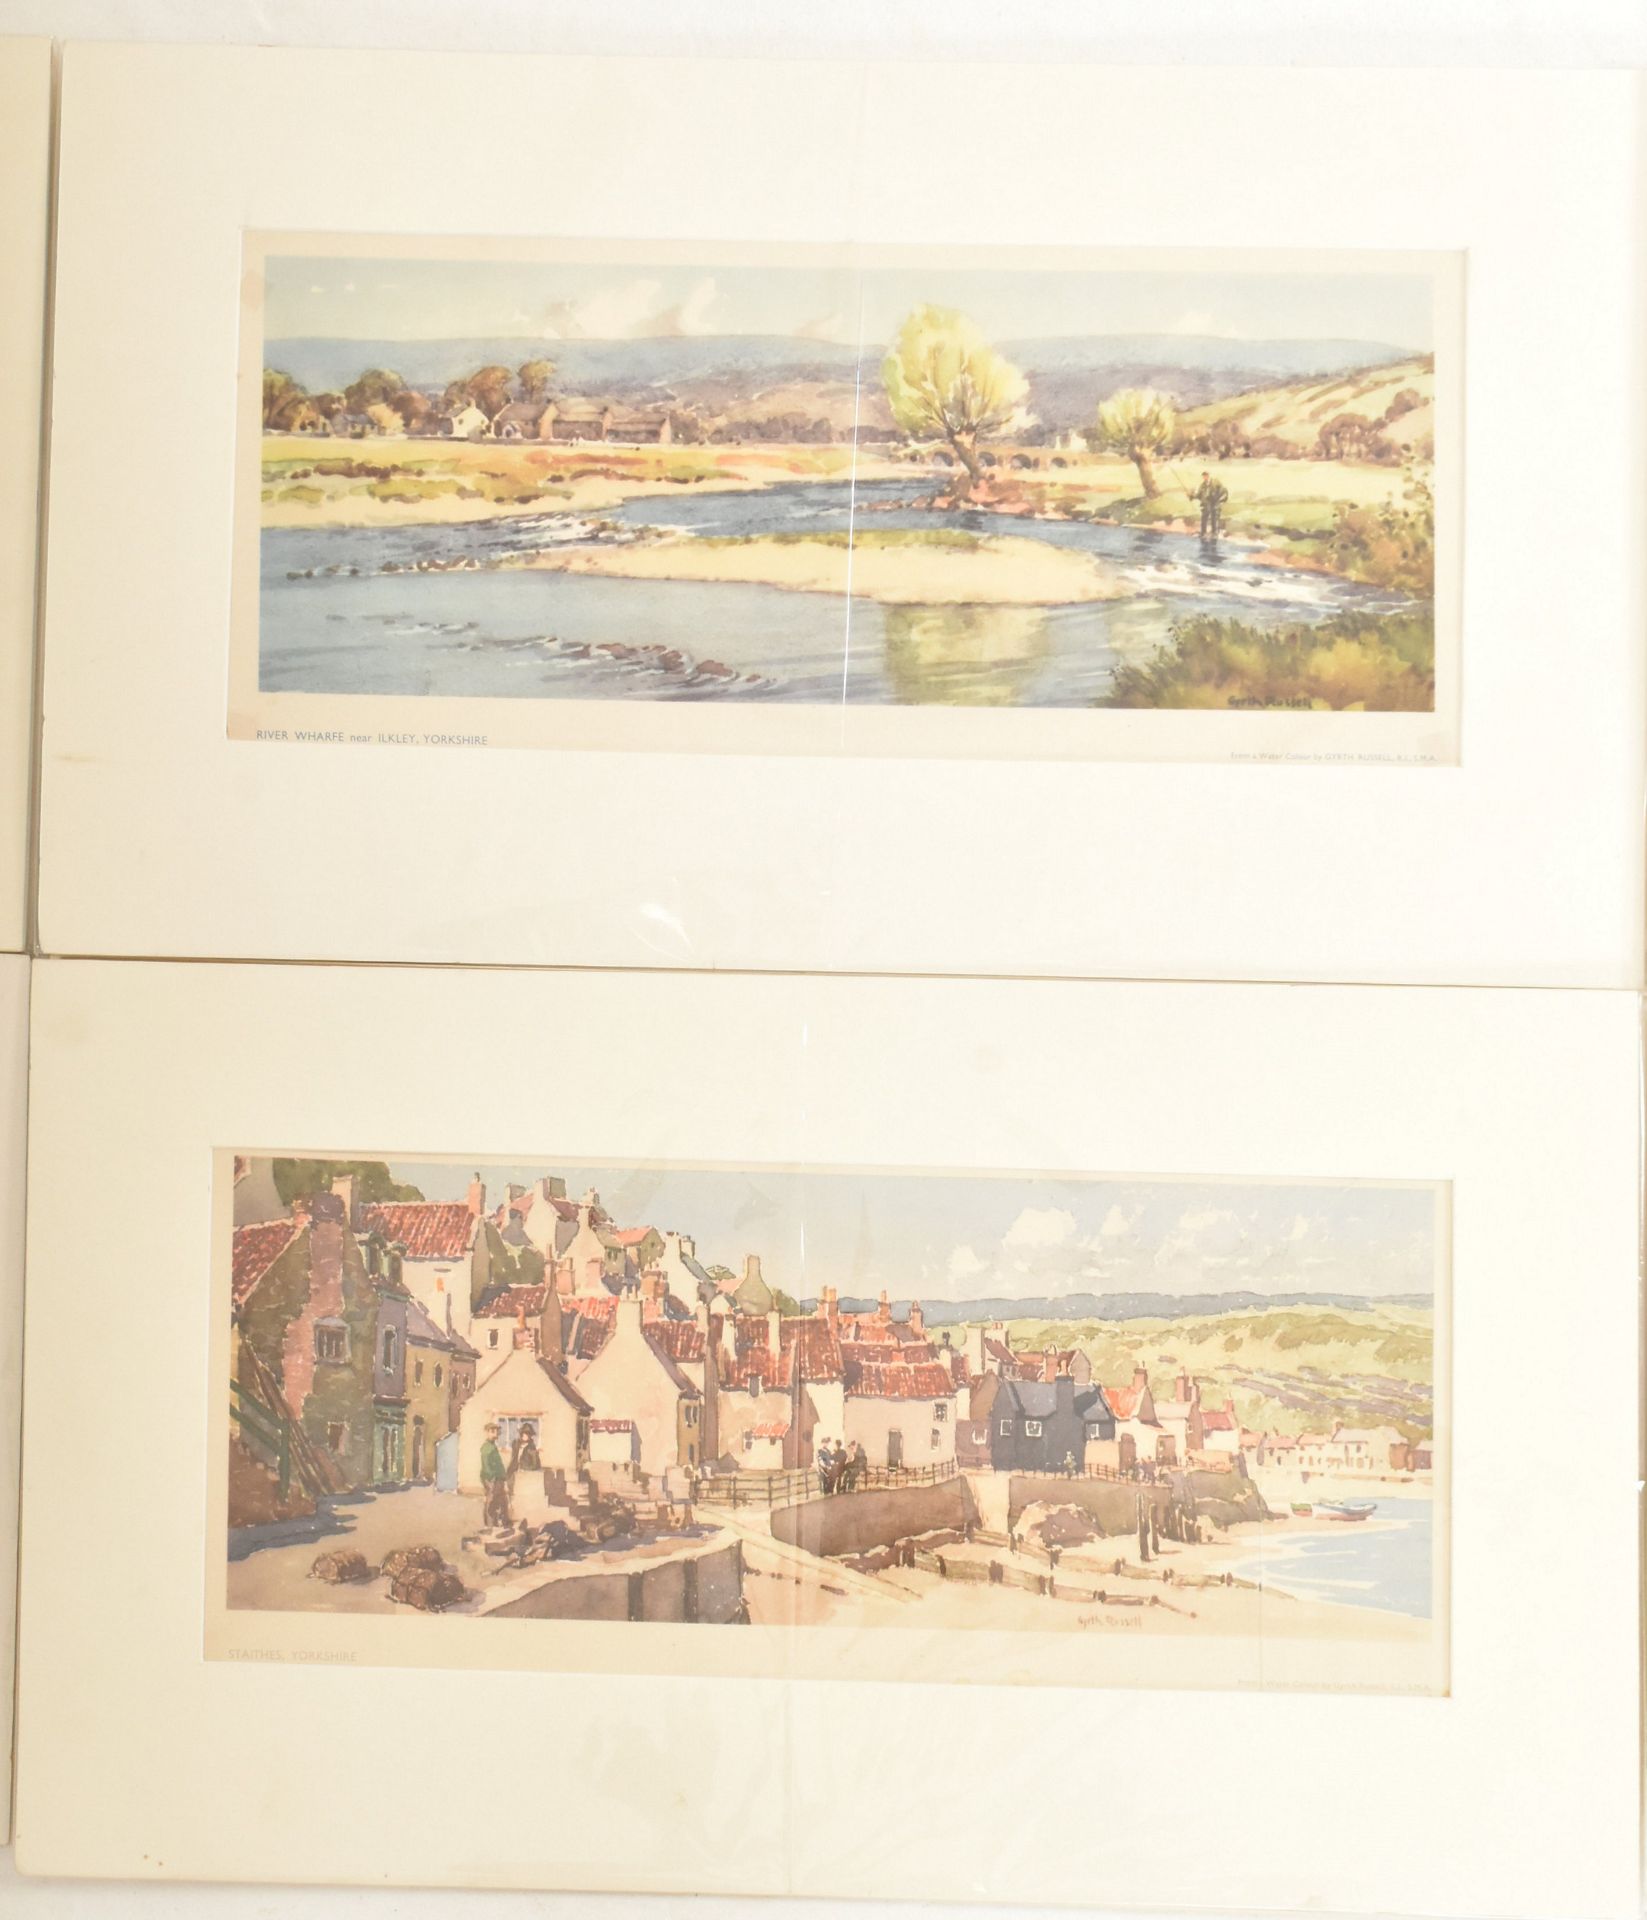 SIX BRITISH RAIL CARRIAGE PRINTS FROM GYRTH RUSSELL PAINTINGS - Image 3 of 5